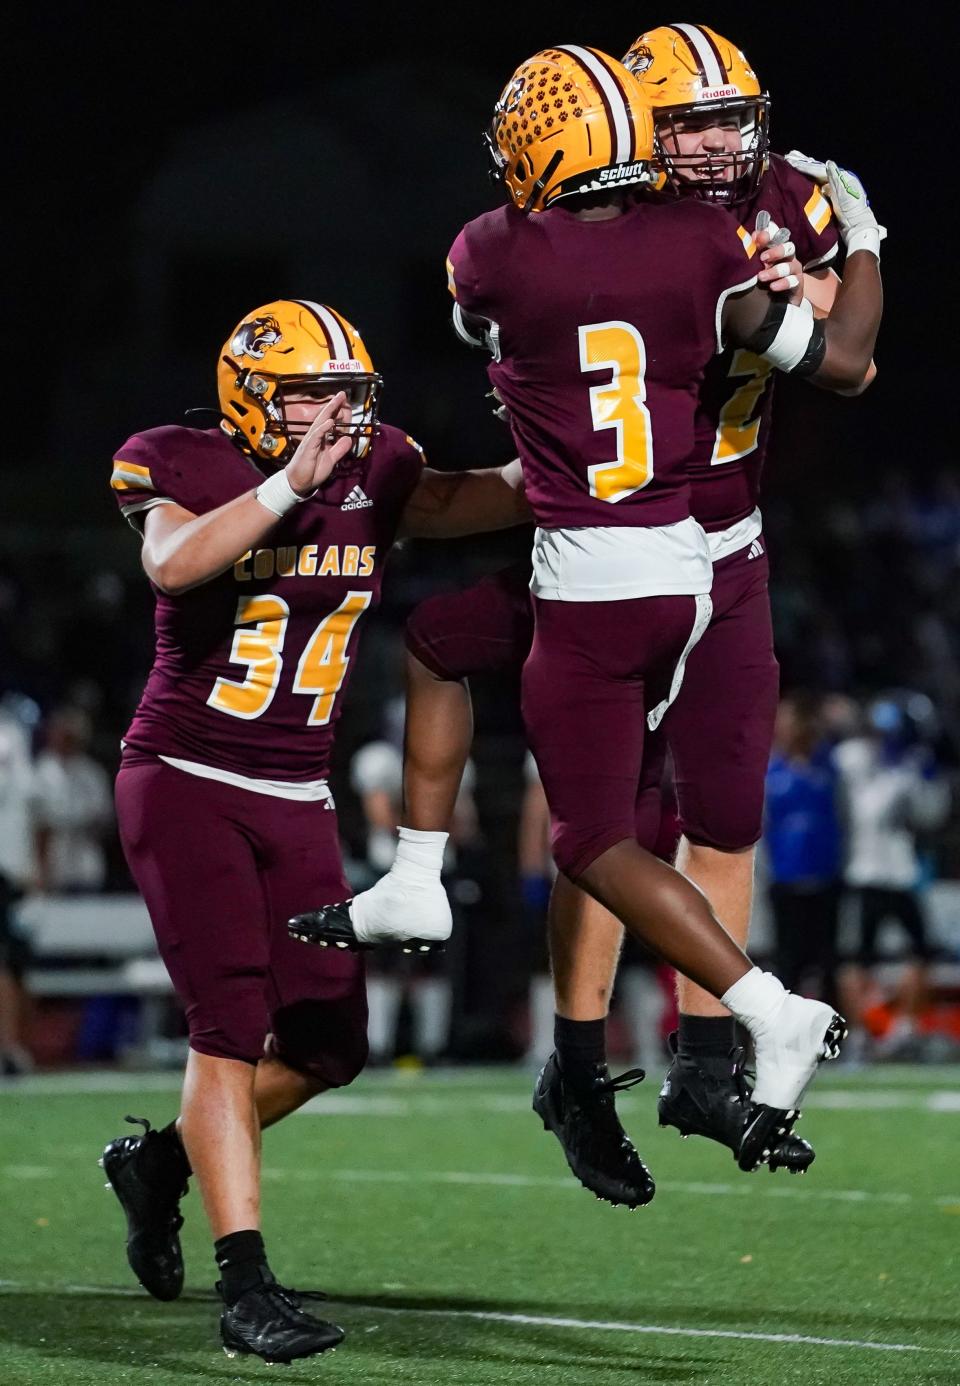 Bloomington North’s Zeke Trueblood (34), Stephon Opoku (3) and Lucas Rice (42) celebrate after a play during the football game against Columbus North at Bloomington North on Friday, Oct. 6, 2023.